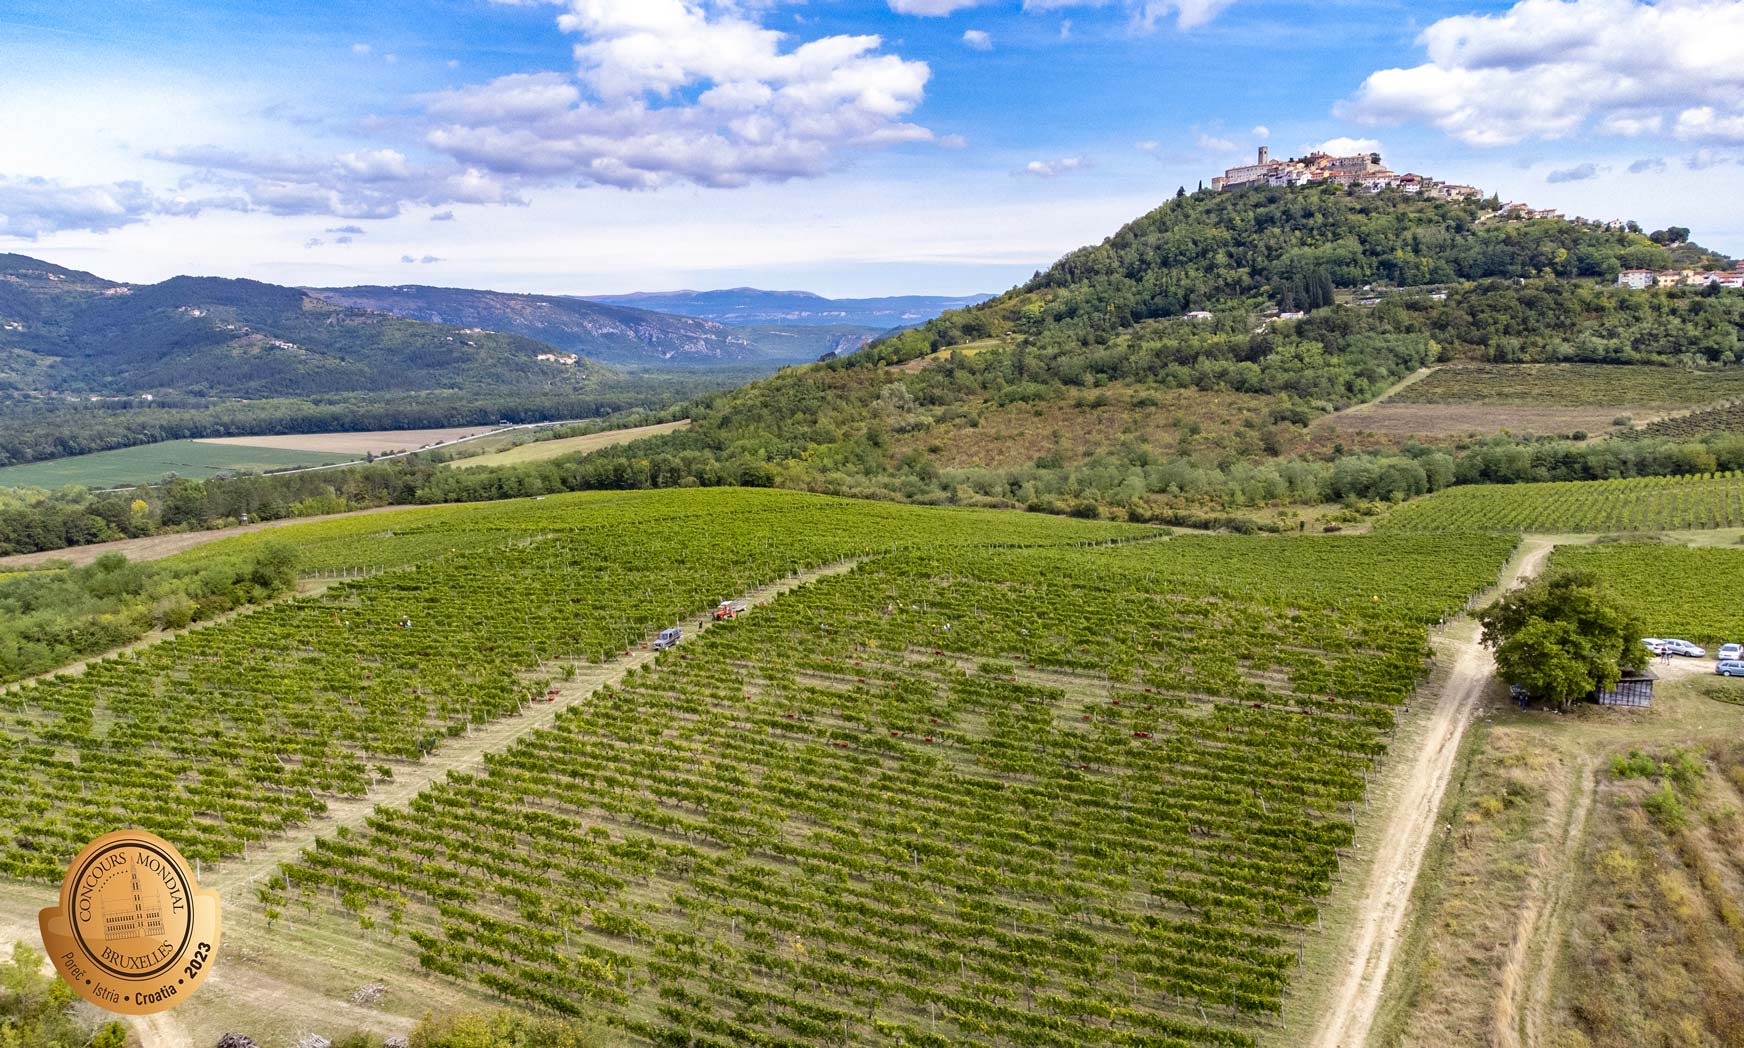 “The use of historic regional grapes is Calabria’s strength”